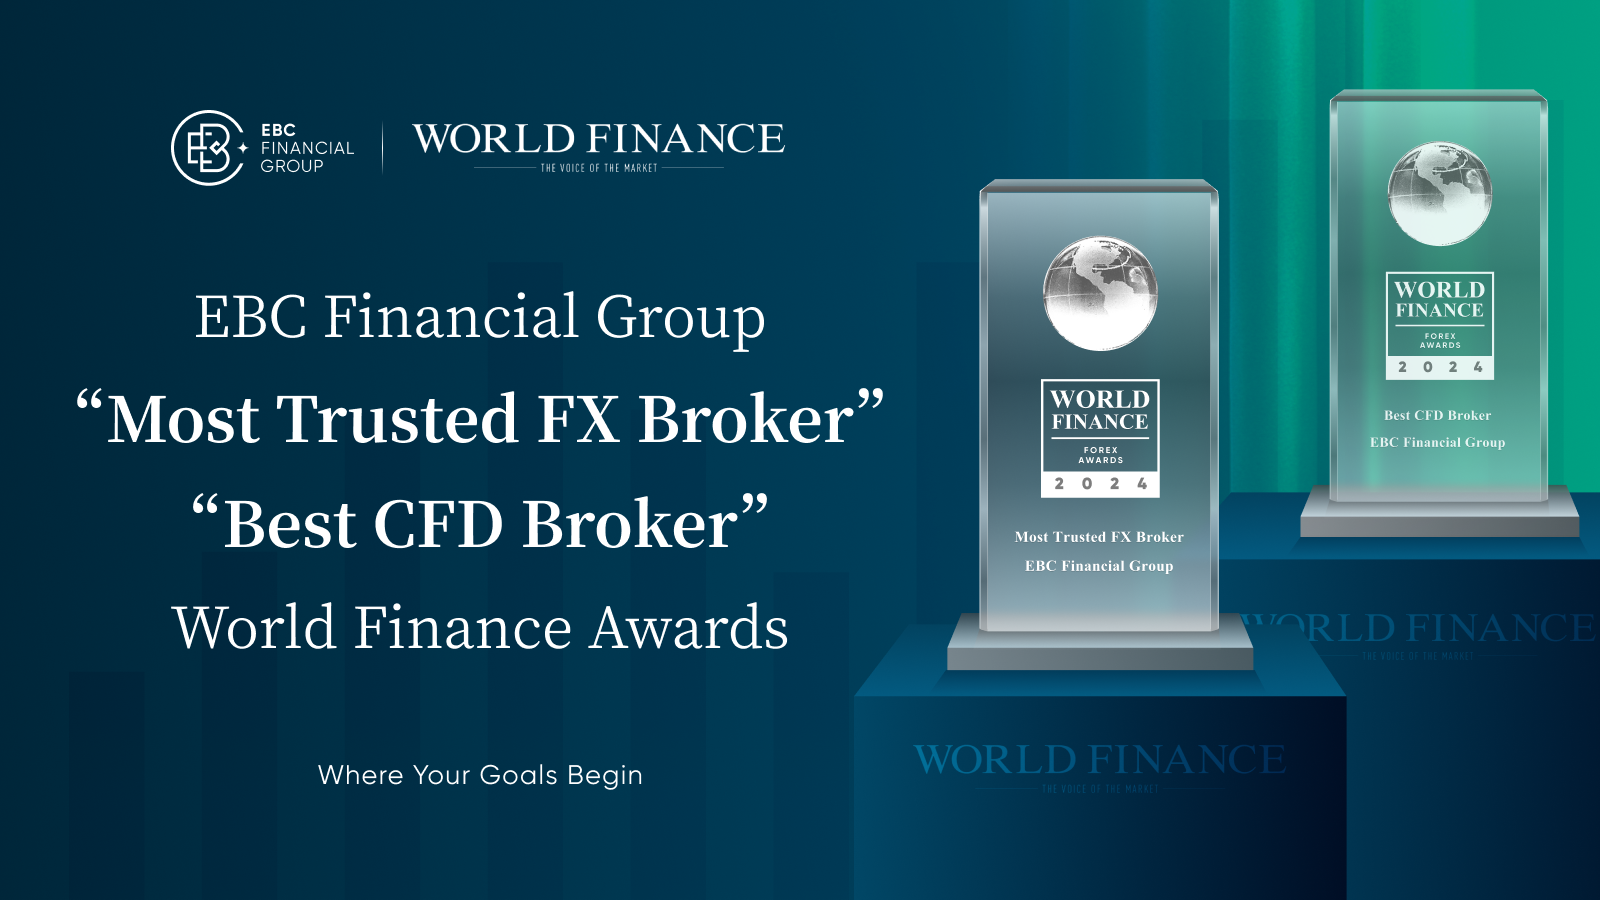 EBC Financial Group won two awards at the World Finance Awards 'Most Trusted FX Broker' and 'Best CFD Broker'